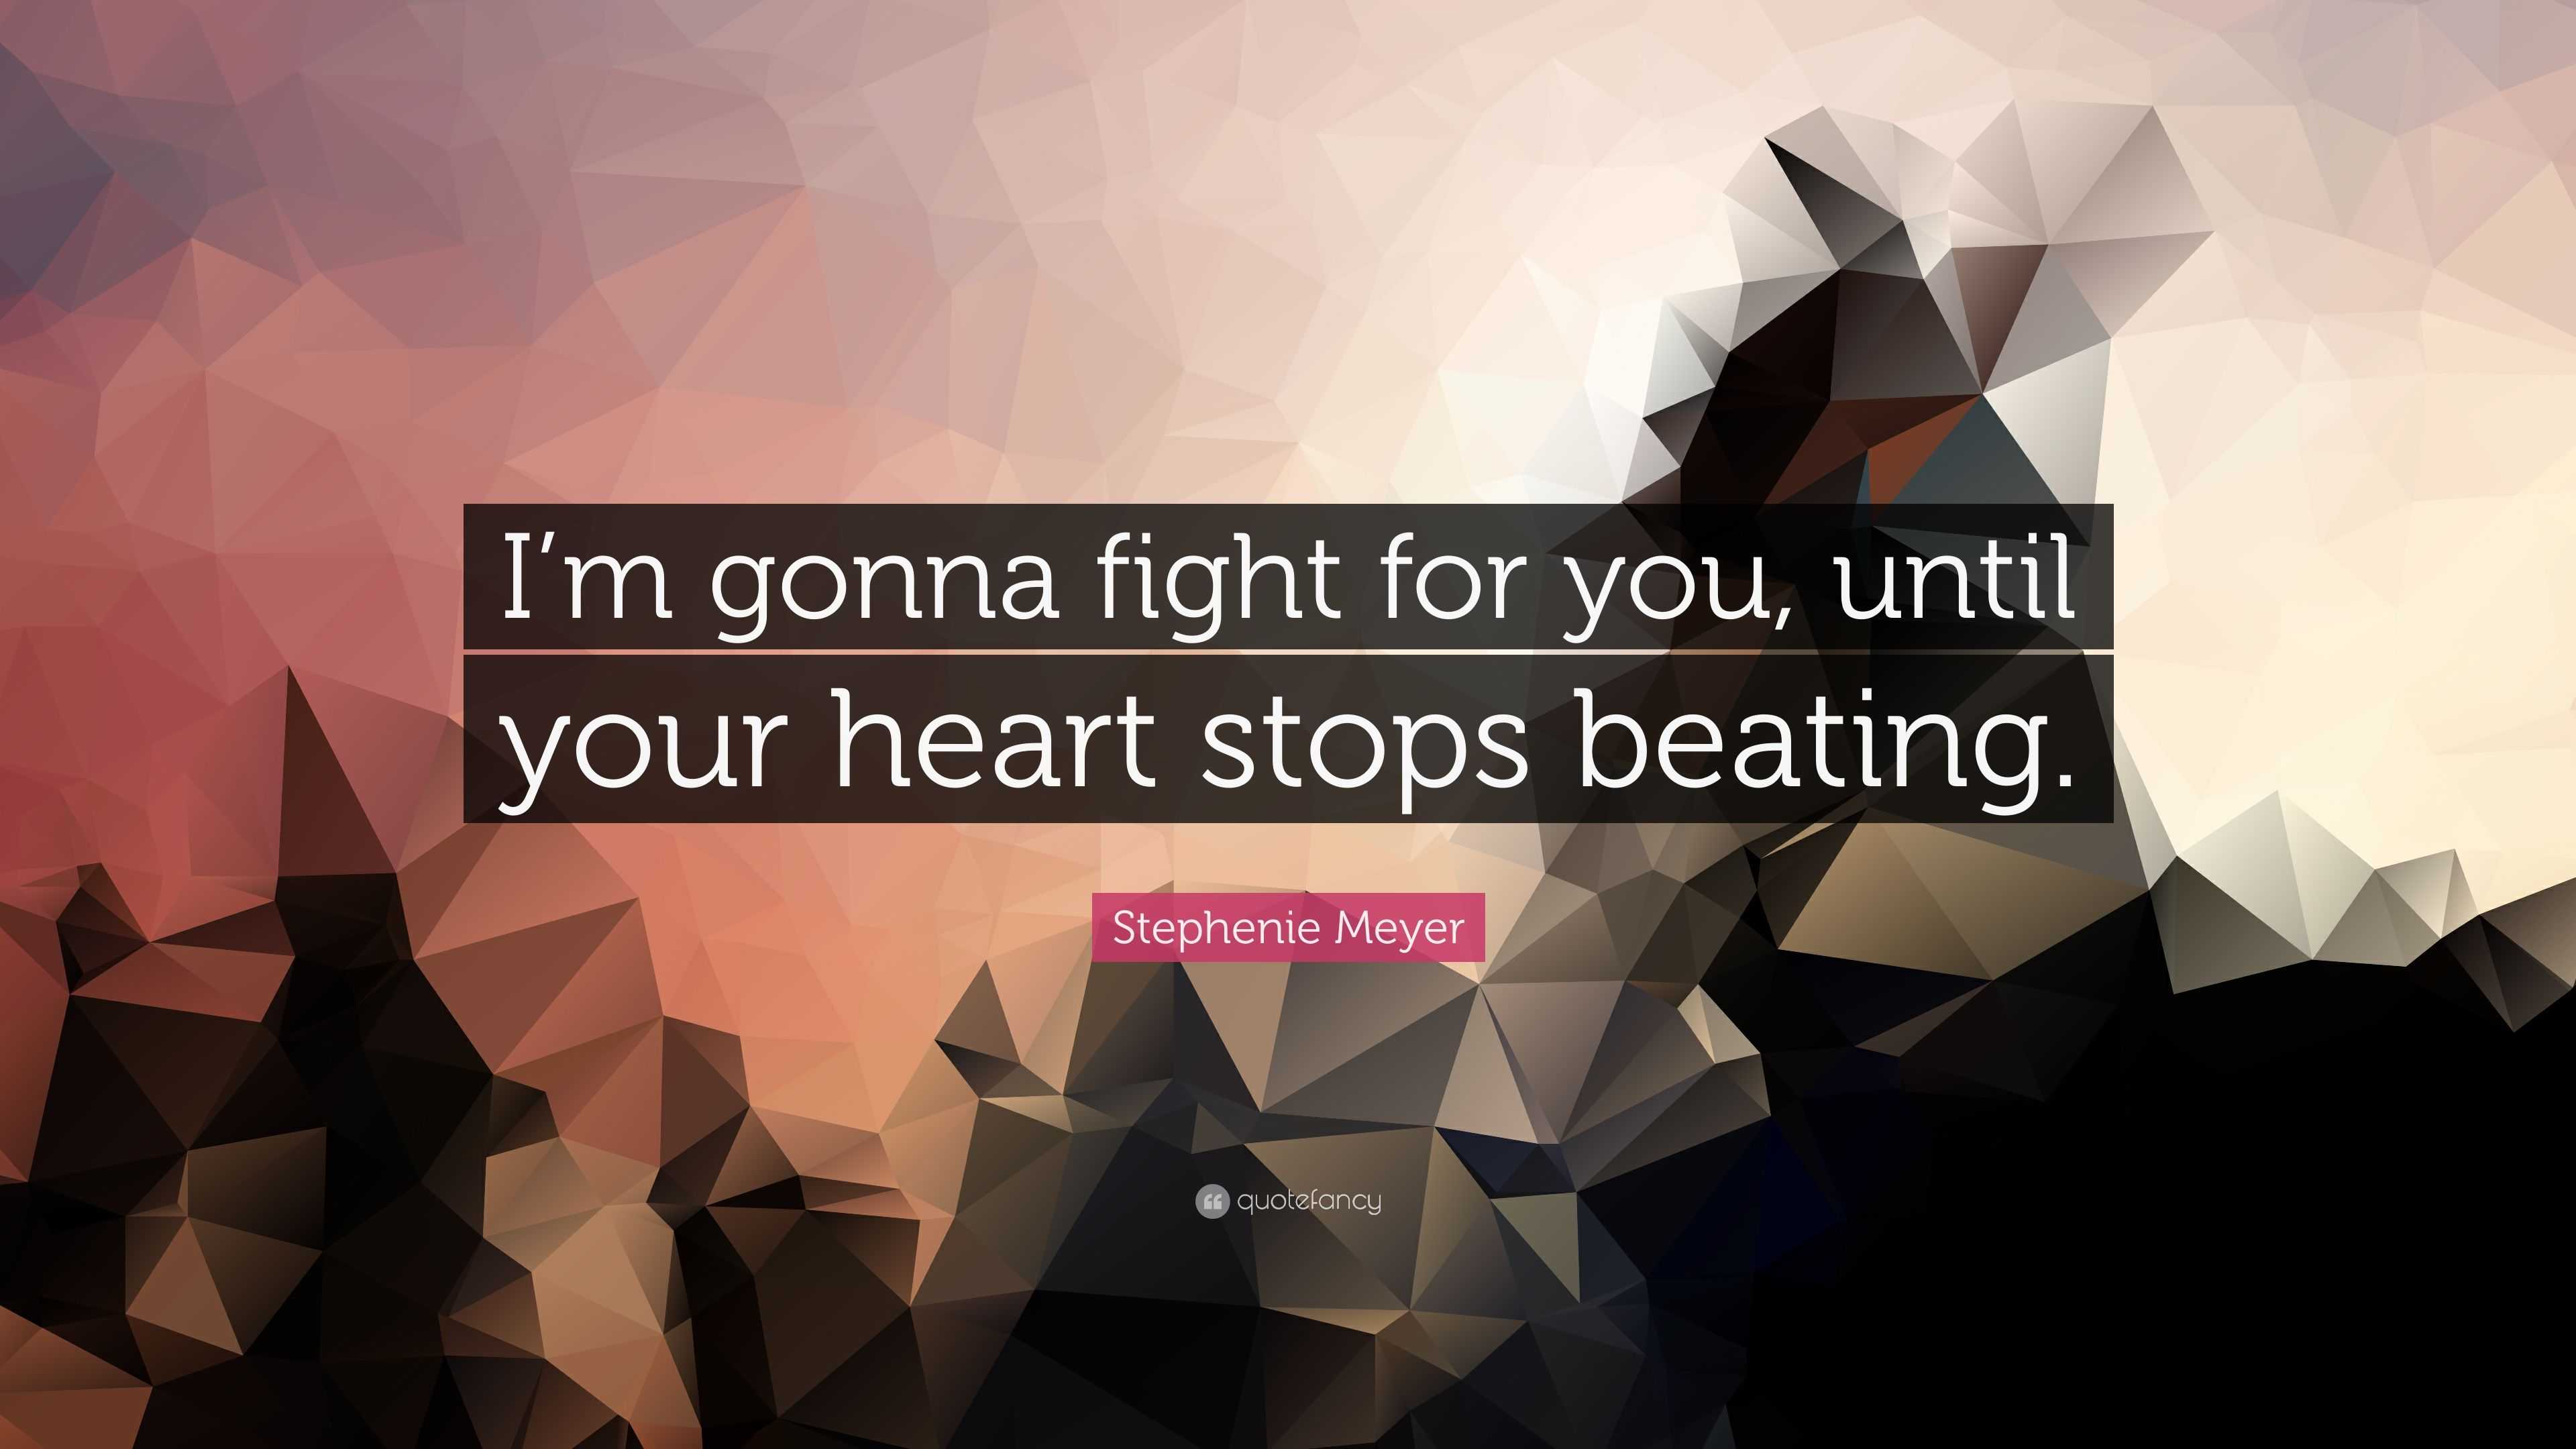 Stephenie Meyer Quote: “I'm gonna fight for you, until your heart